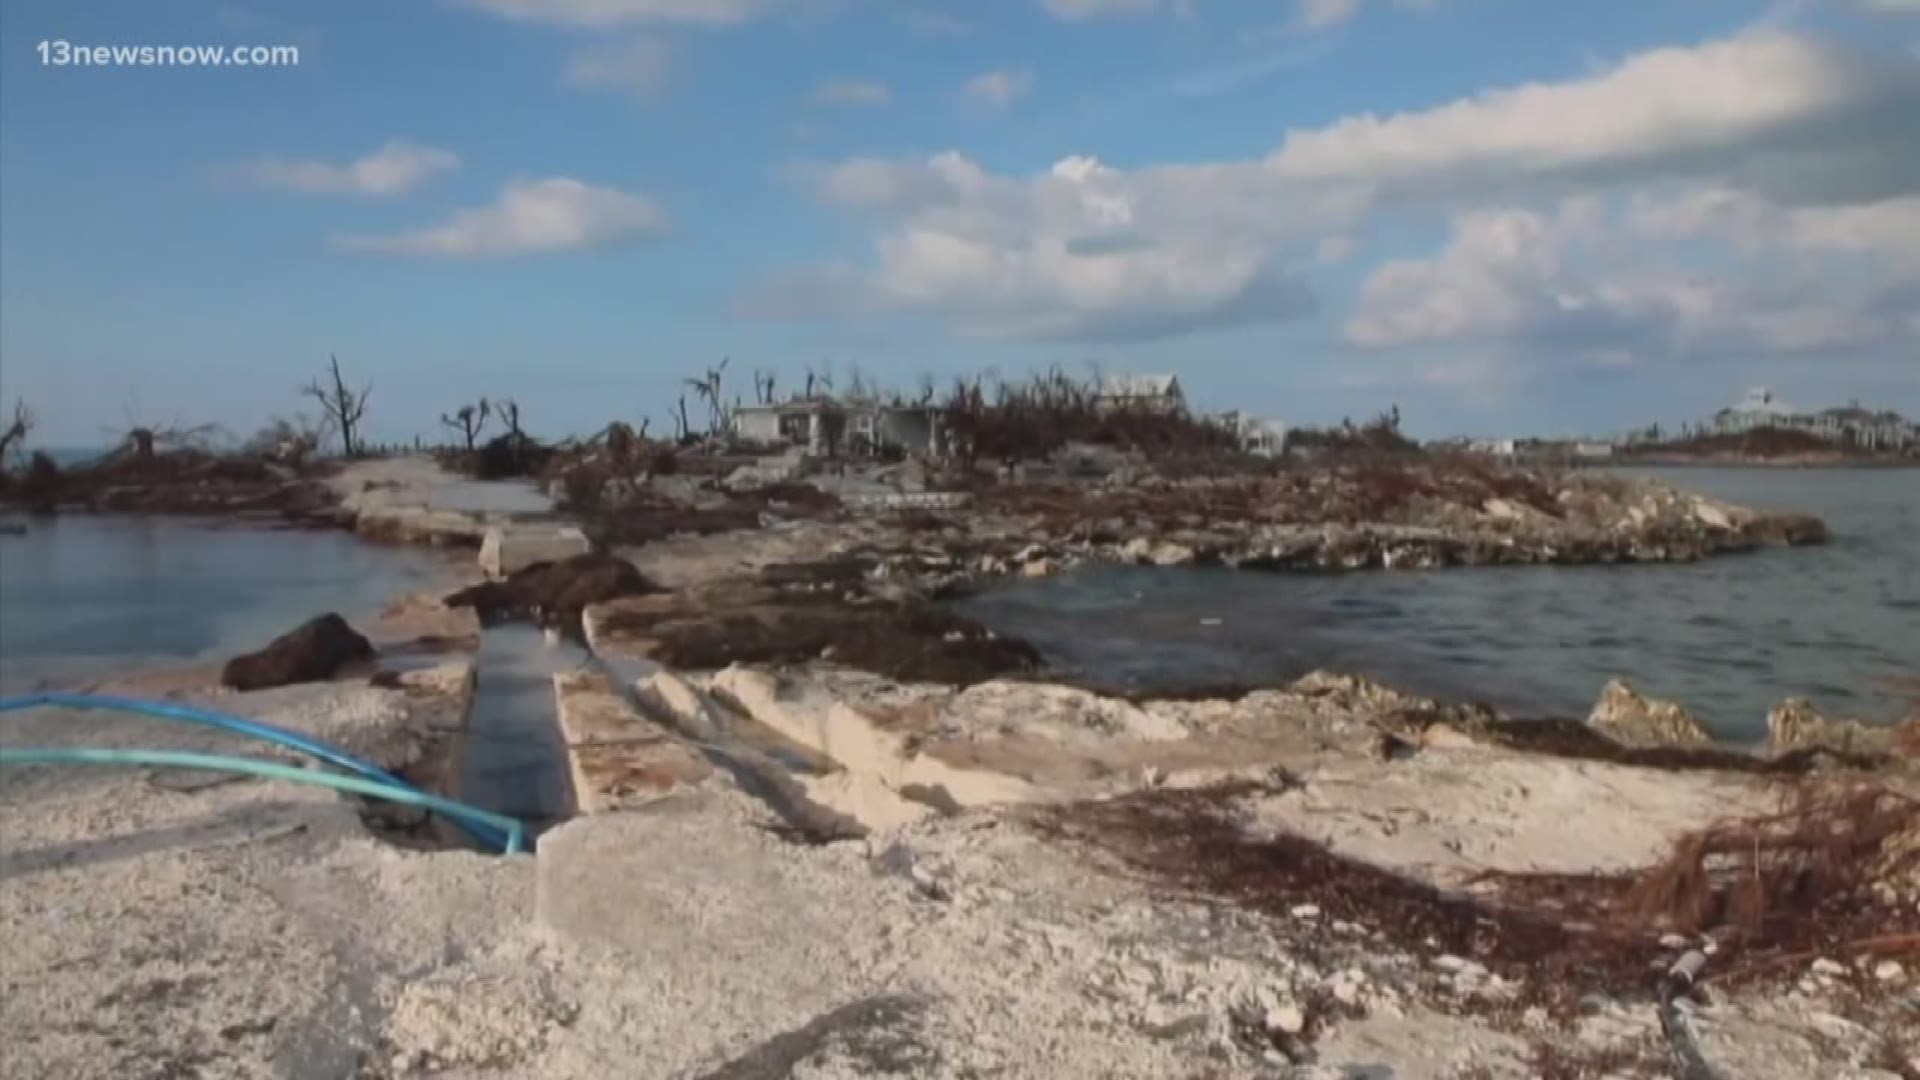 After Hurricane Dorian completely devastated the Bahamas, Hampton University is doing what it can to help. The school is offering students from the University of the Bahamas a free semester.